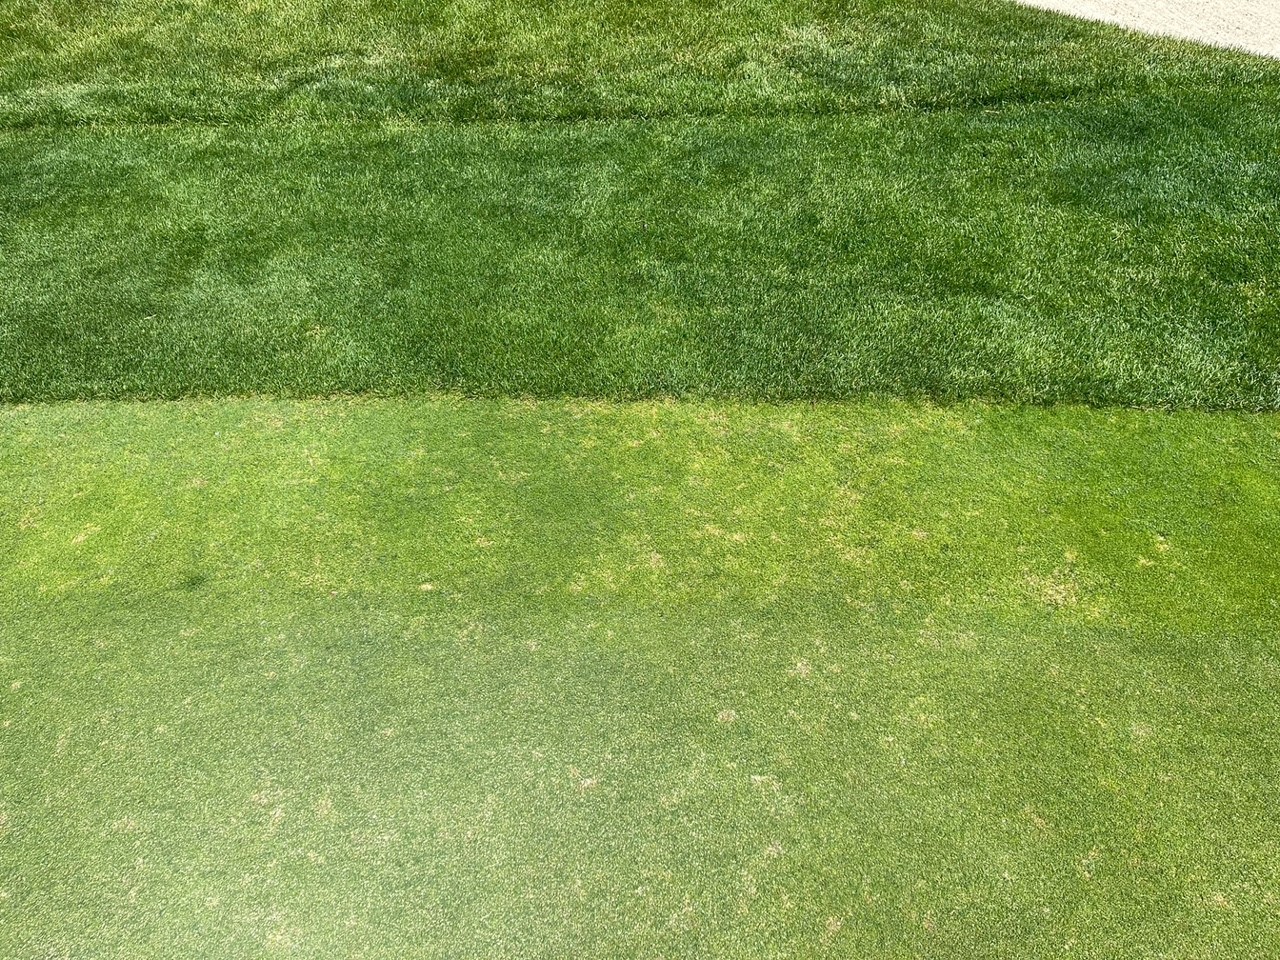 Damage to an annual bluegrass collar and putting green.